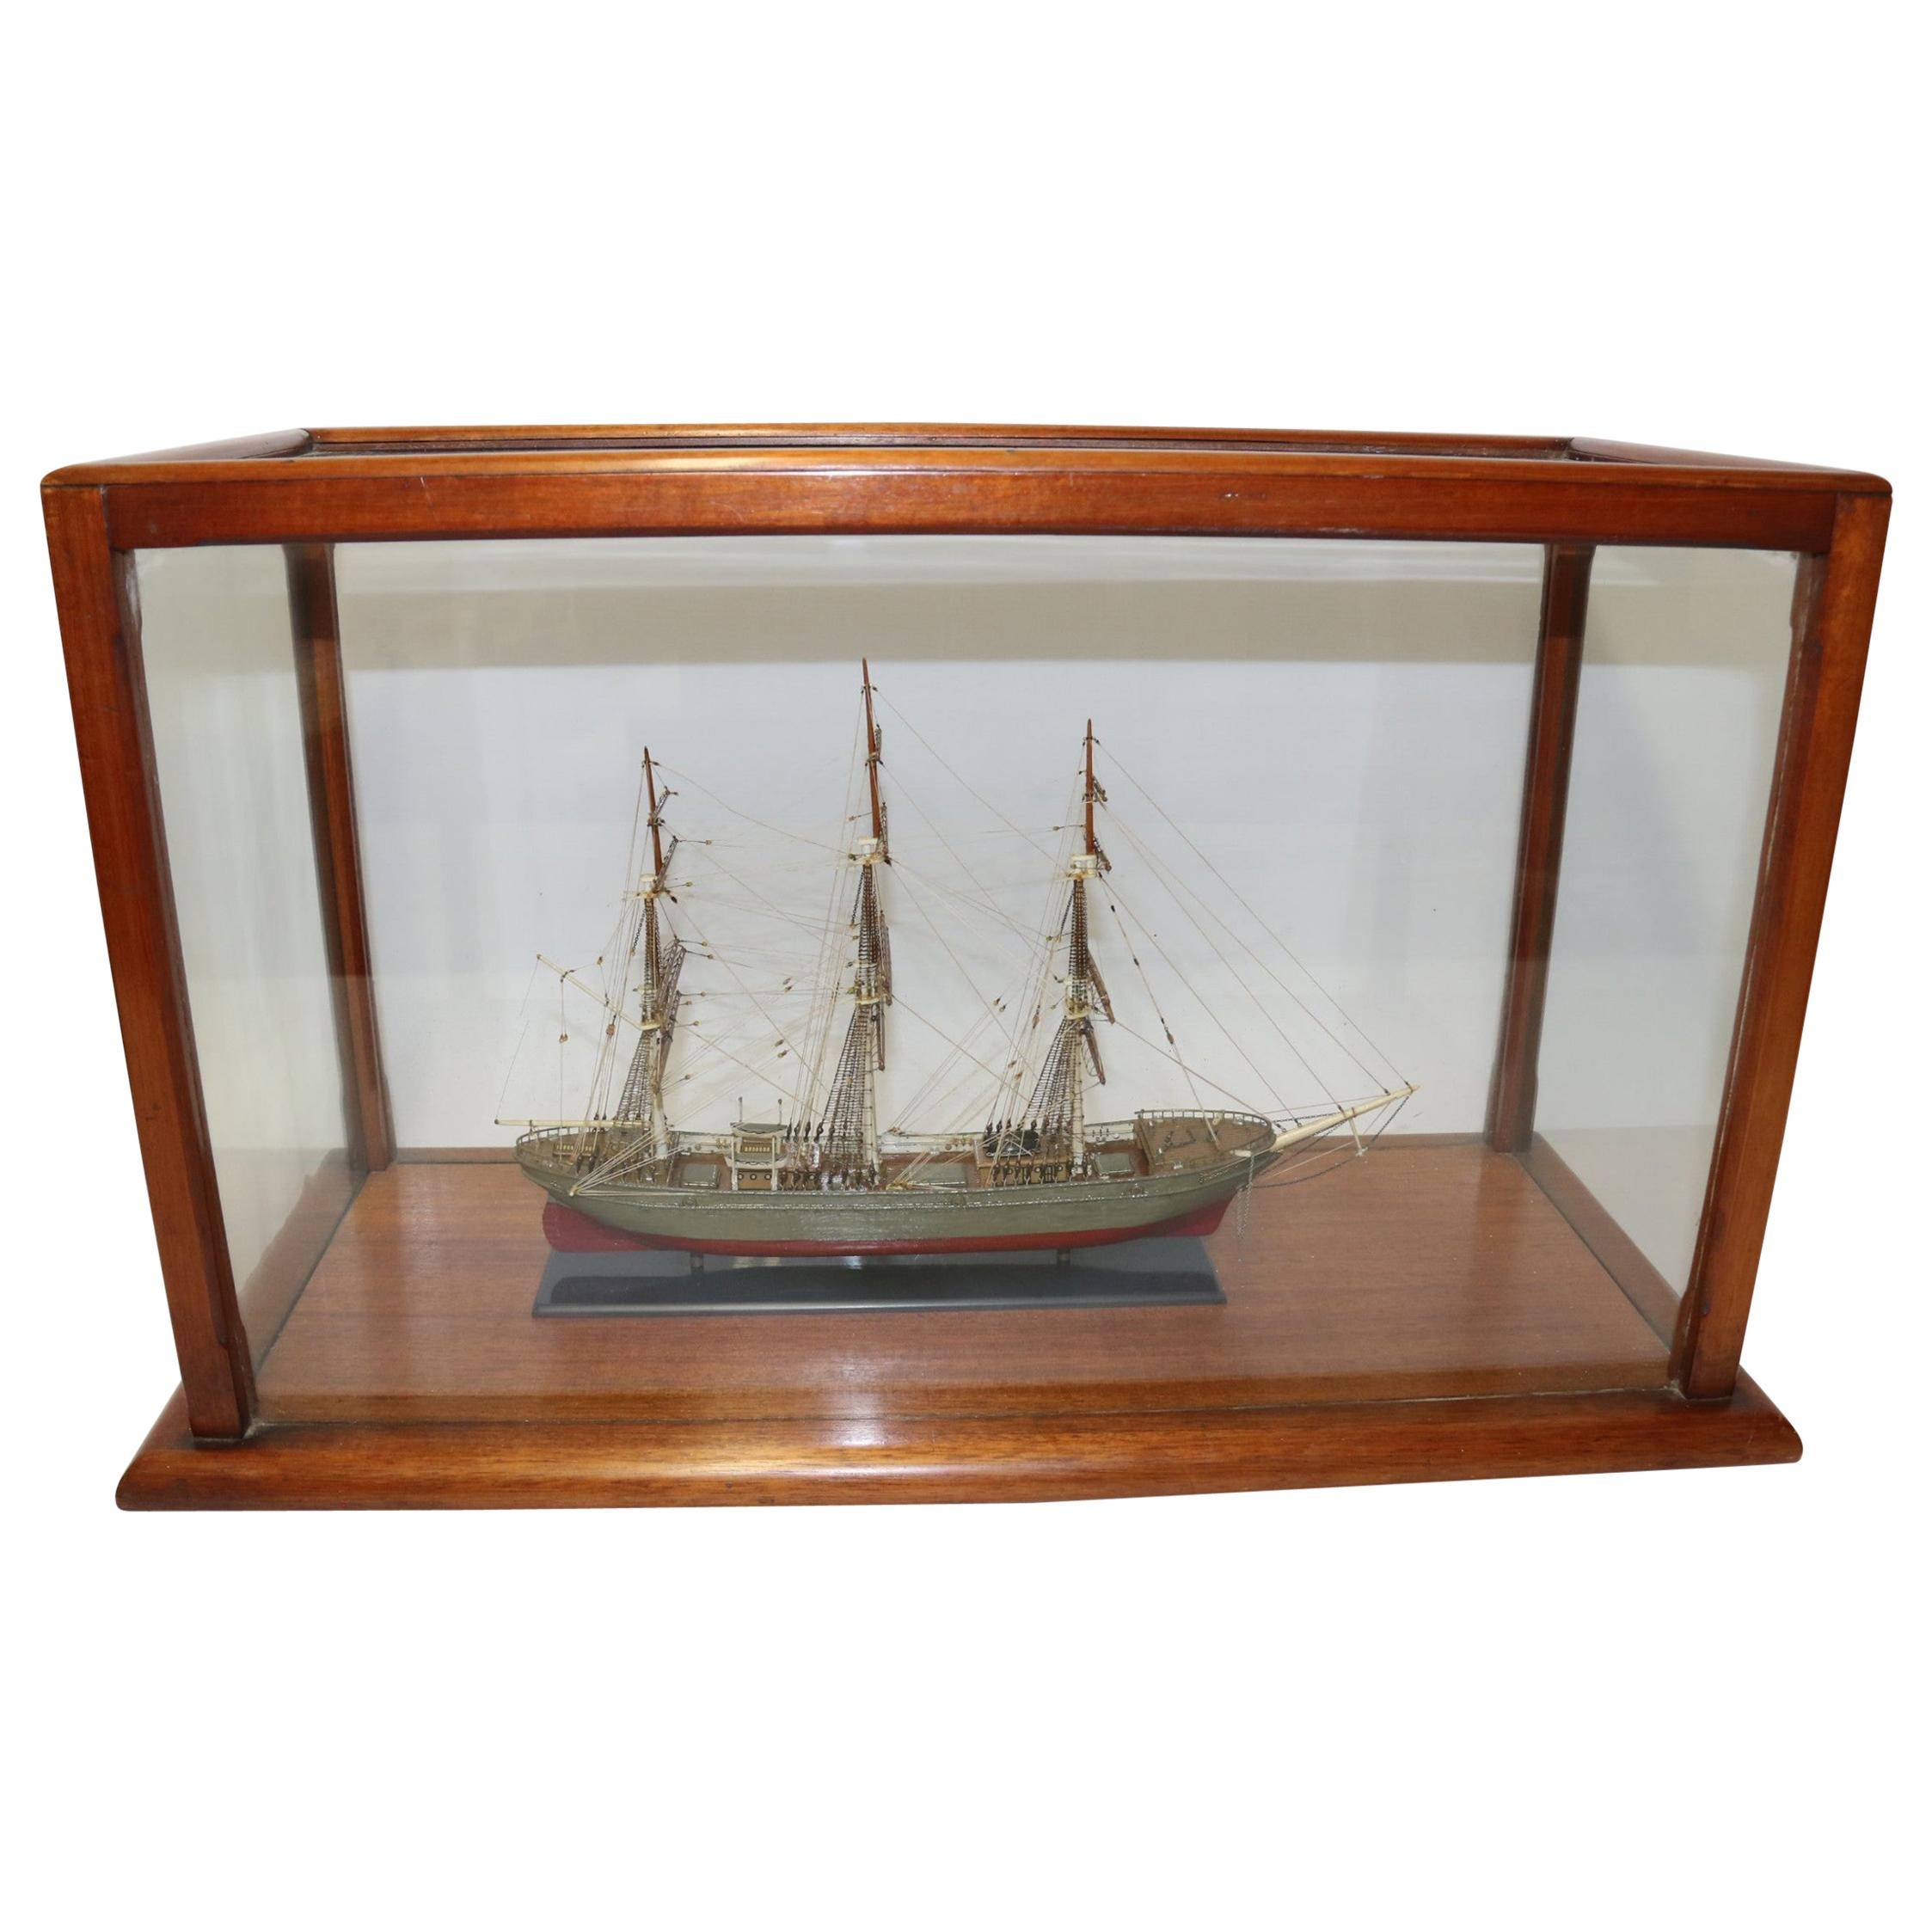 Detailed Early 20th Century English Scale Model of a 3 Mast Sailing Ship For Sale